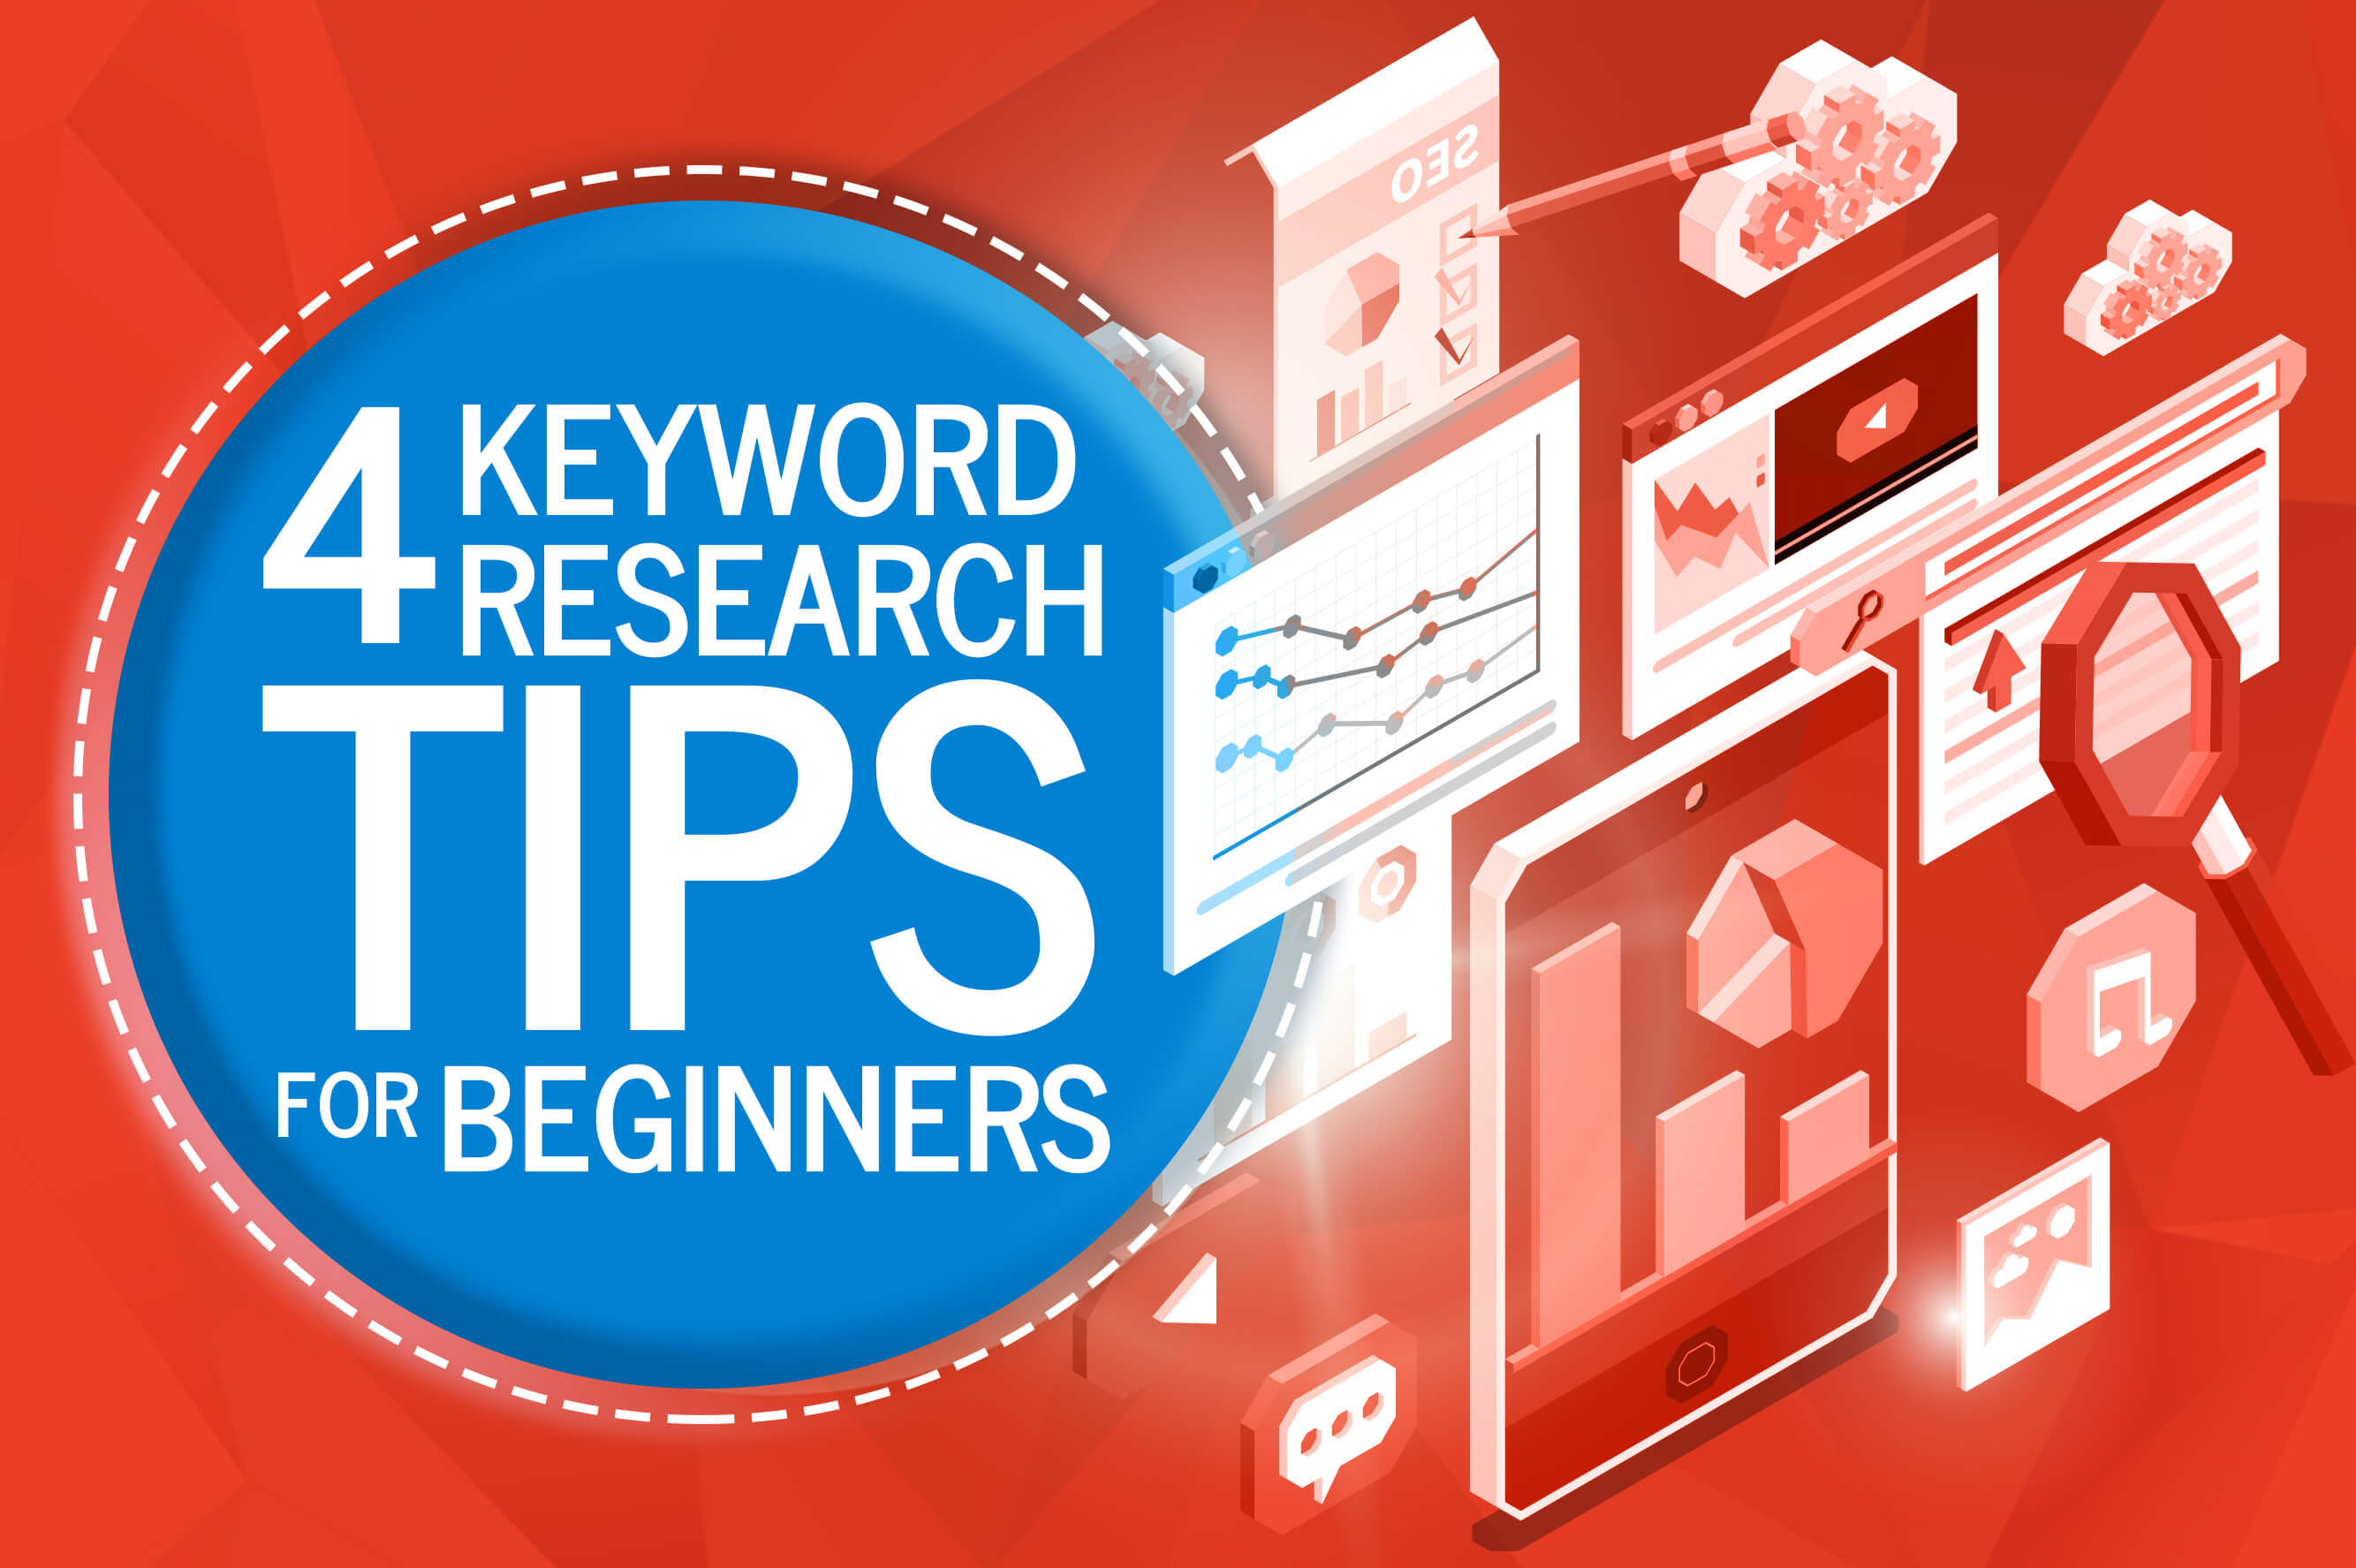 4 Keyword Research Tips for Beginners